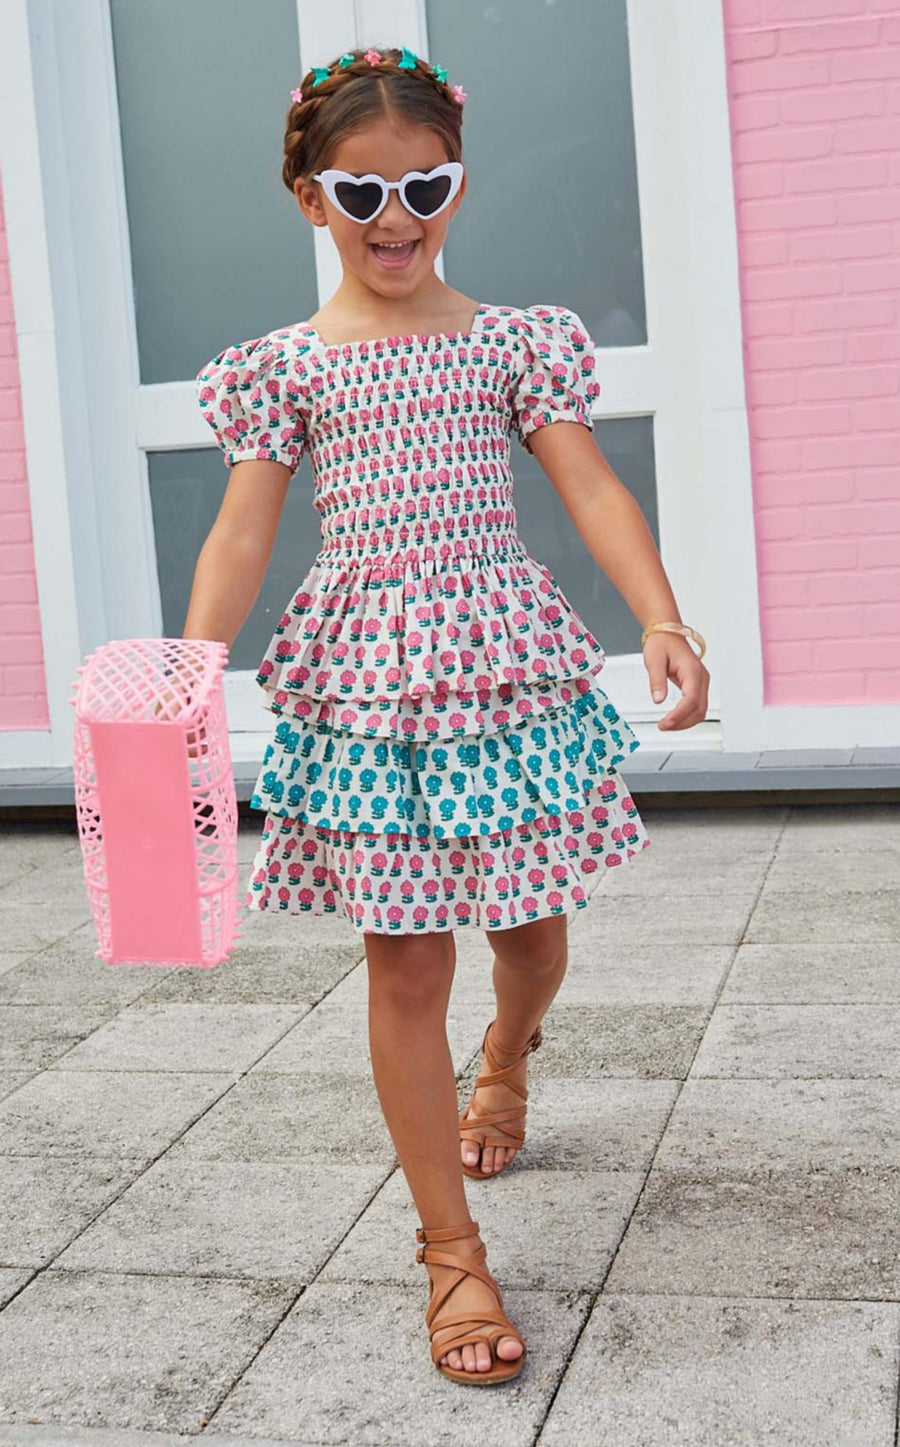 Little girl smiling and wearing our tiered skort with pink and blue flowers alternating colors on each tier. 